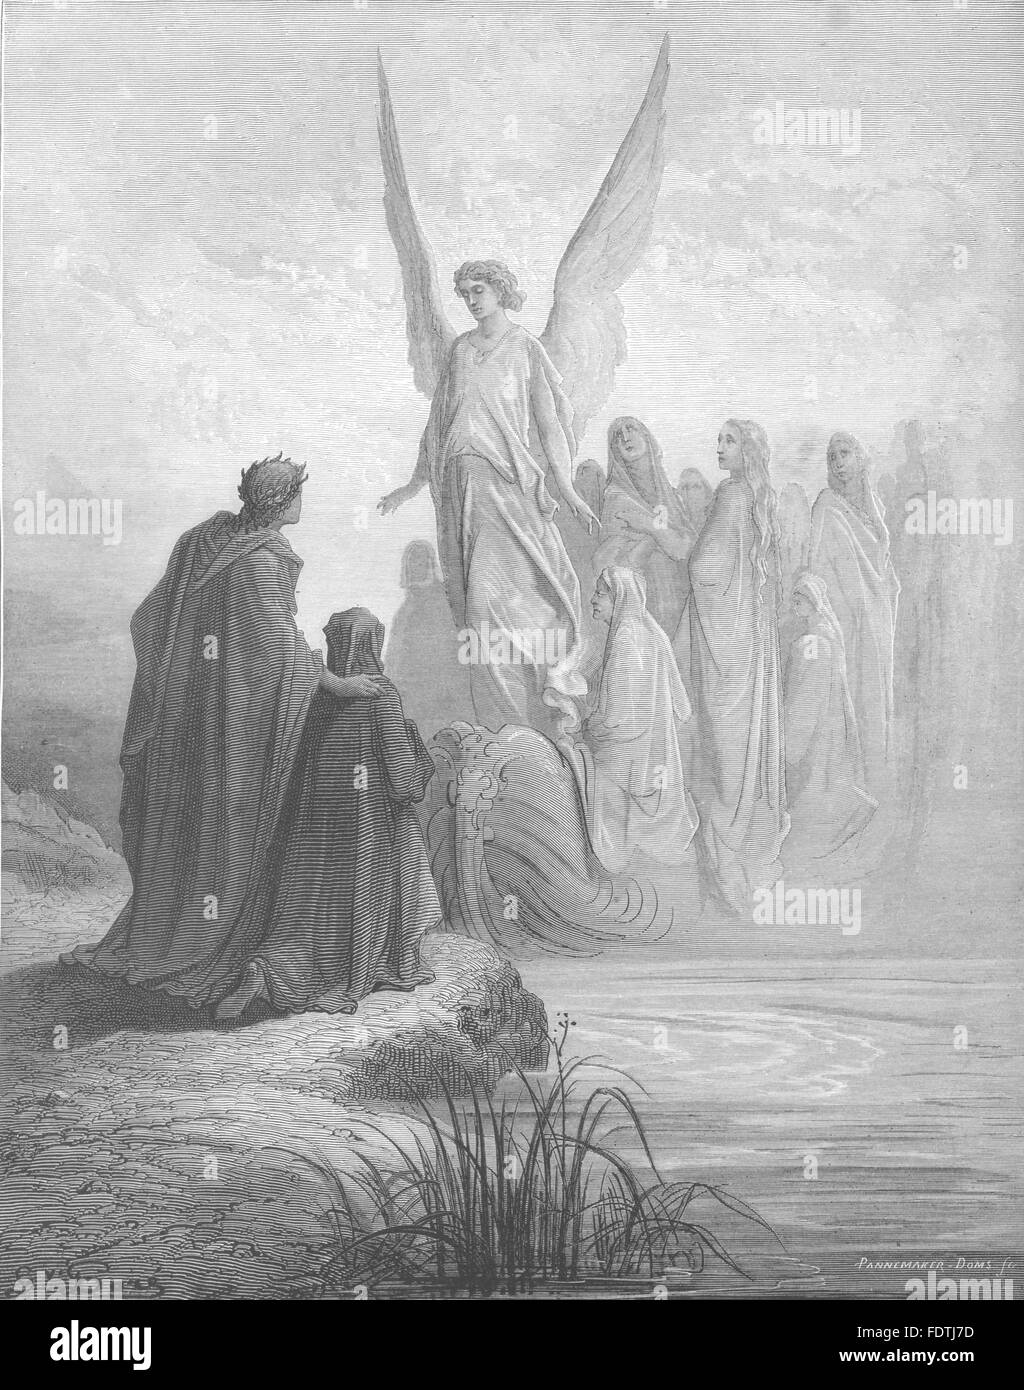 DANTE: Heavenly Steersman Prow seen, Visibly written blessed looks, print 1893 Stock Photo